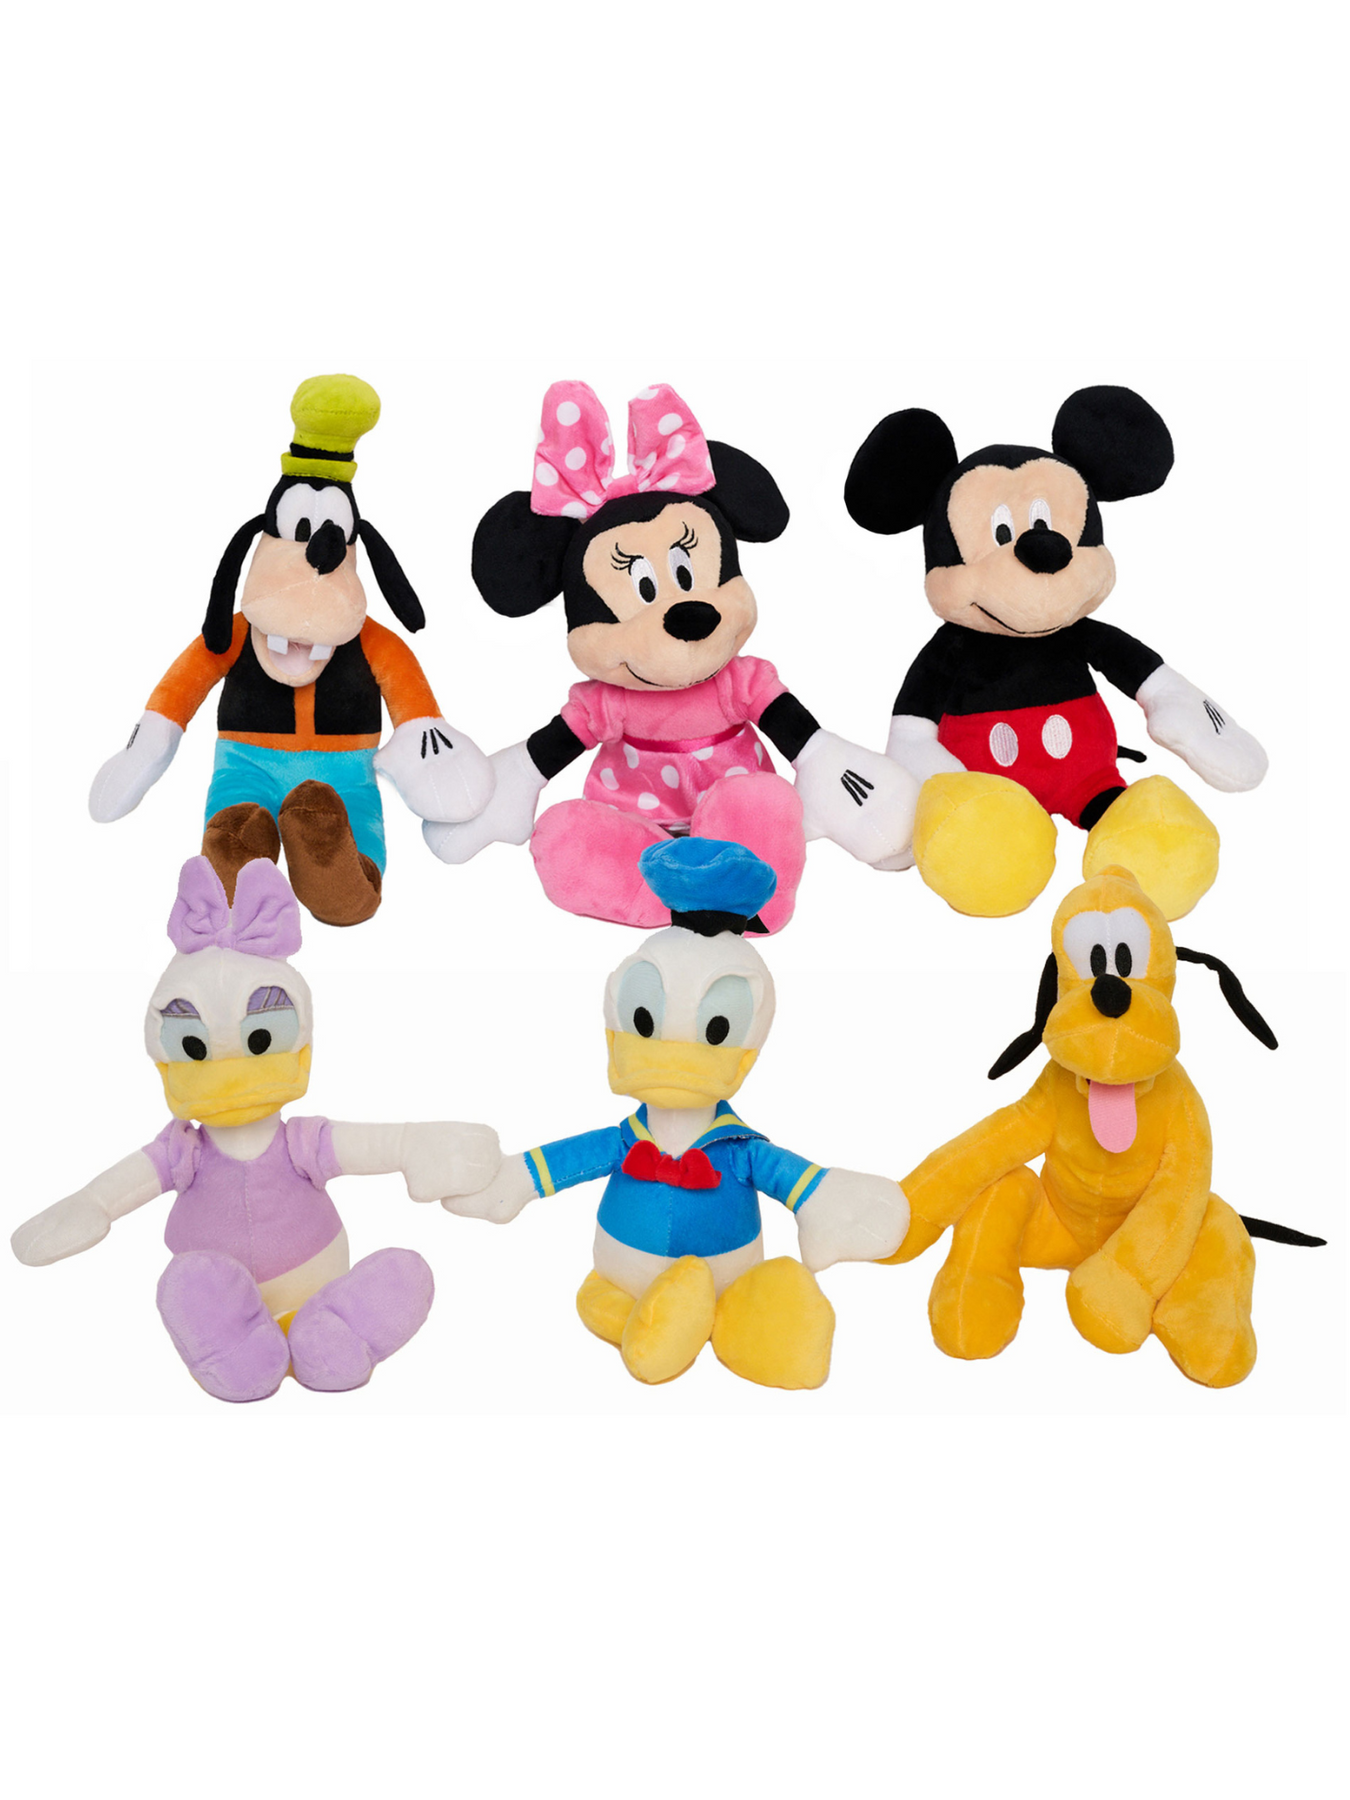 Disney Mickey Mouse 19-inch Plush Stuffed Animal, Kids Toys for Ages 2 up 